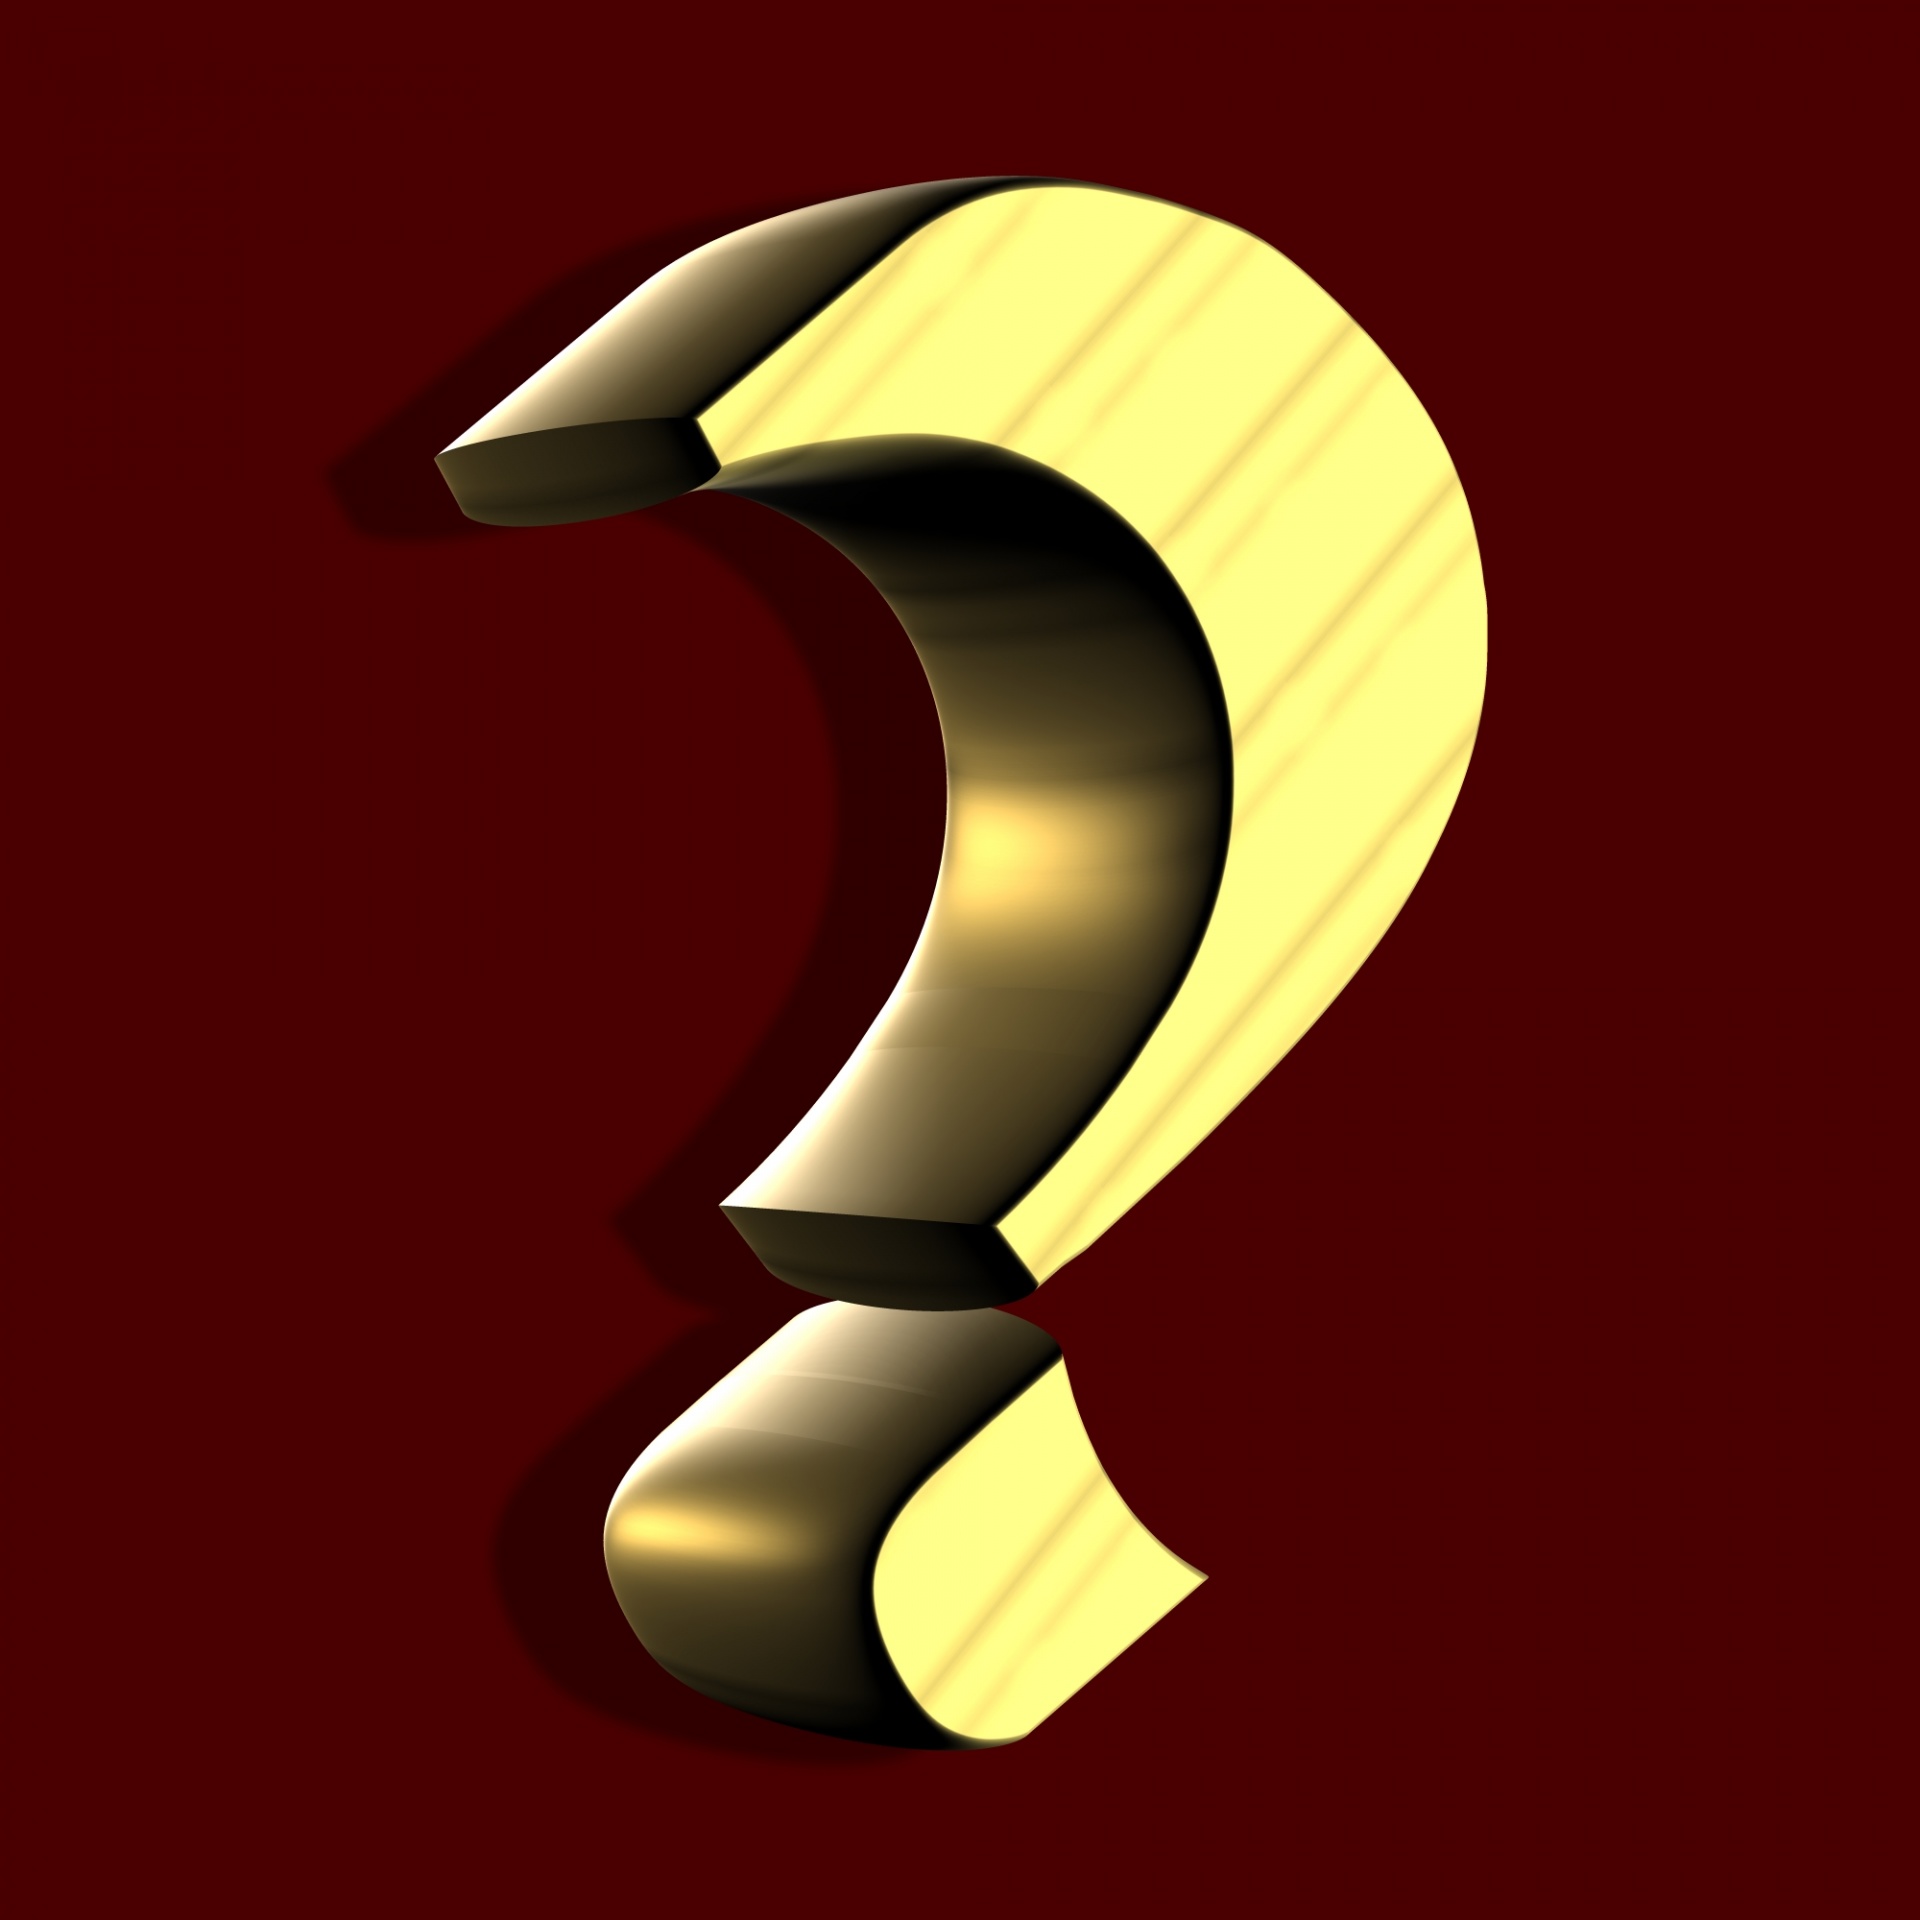 question mark concept gold free photo